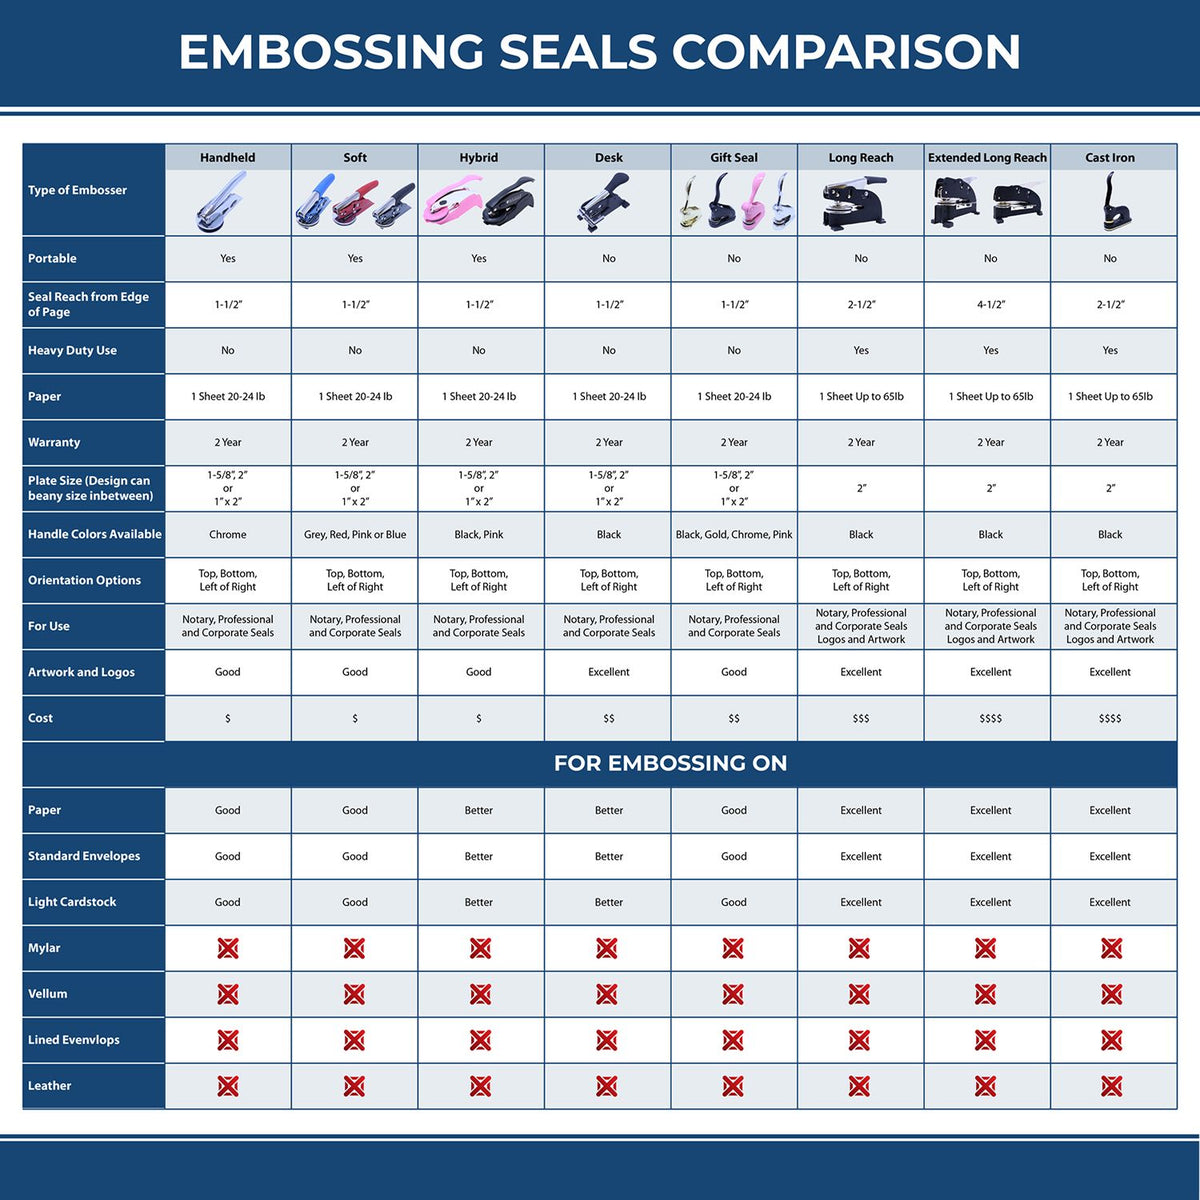 A comparison chart for the different types of mount models available for the New Mexico Desk Architect Embossing Seal.